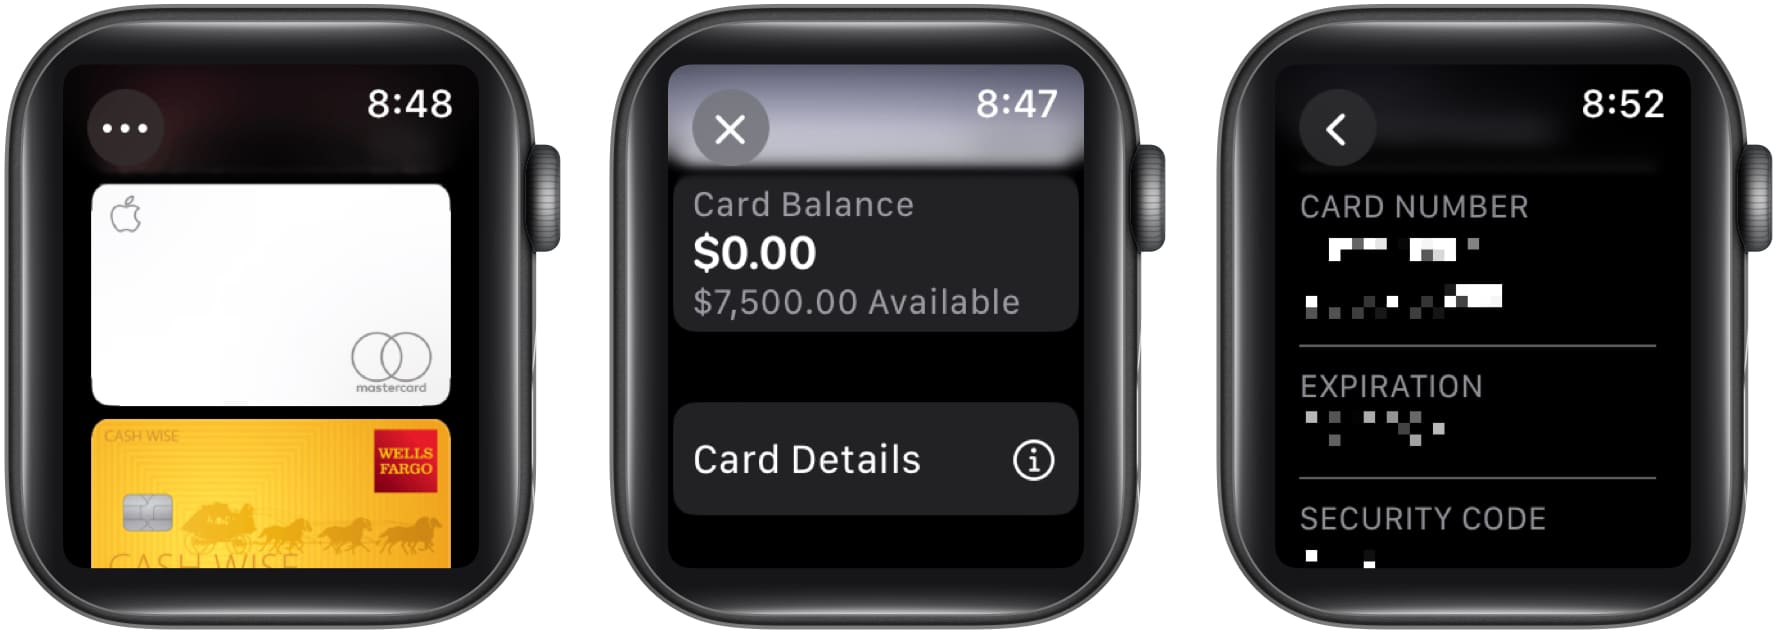 Steps to view Apple Card number and details on Apple Watch